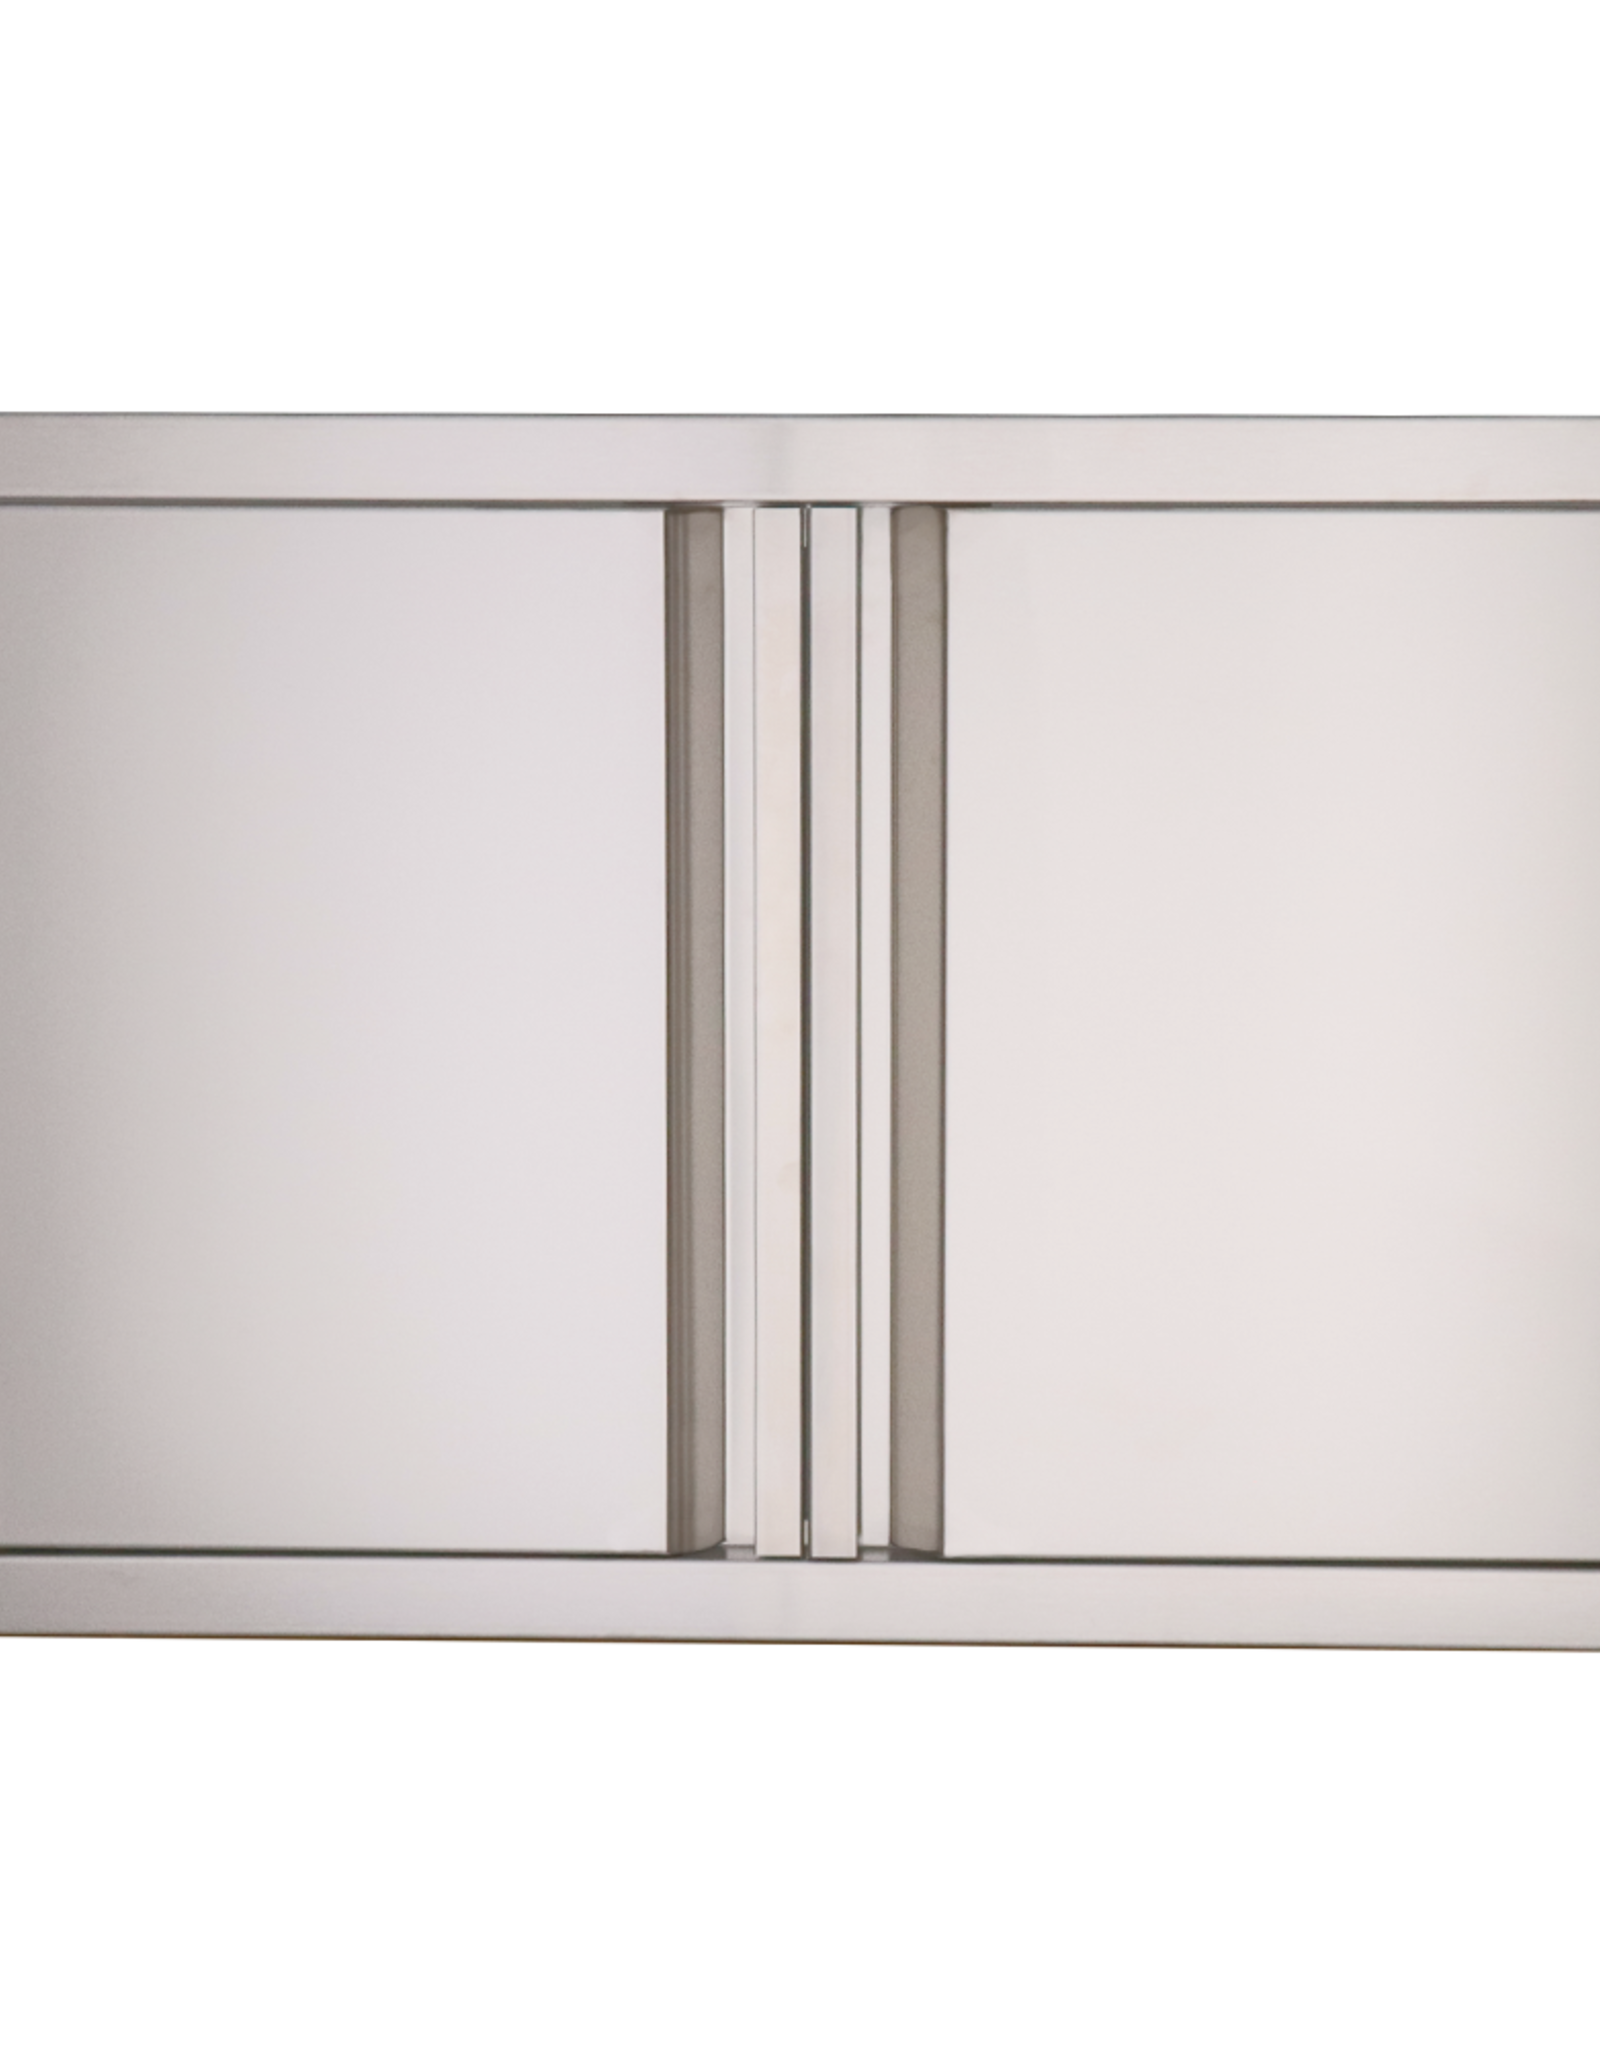 Renaissance Cooking Systems The Valiant Series Double Door Large - VDD2